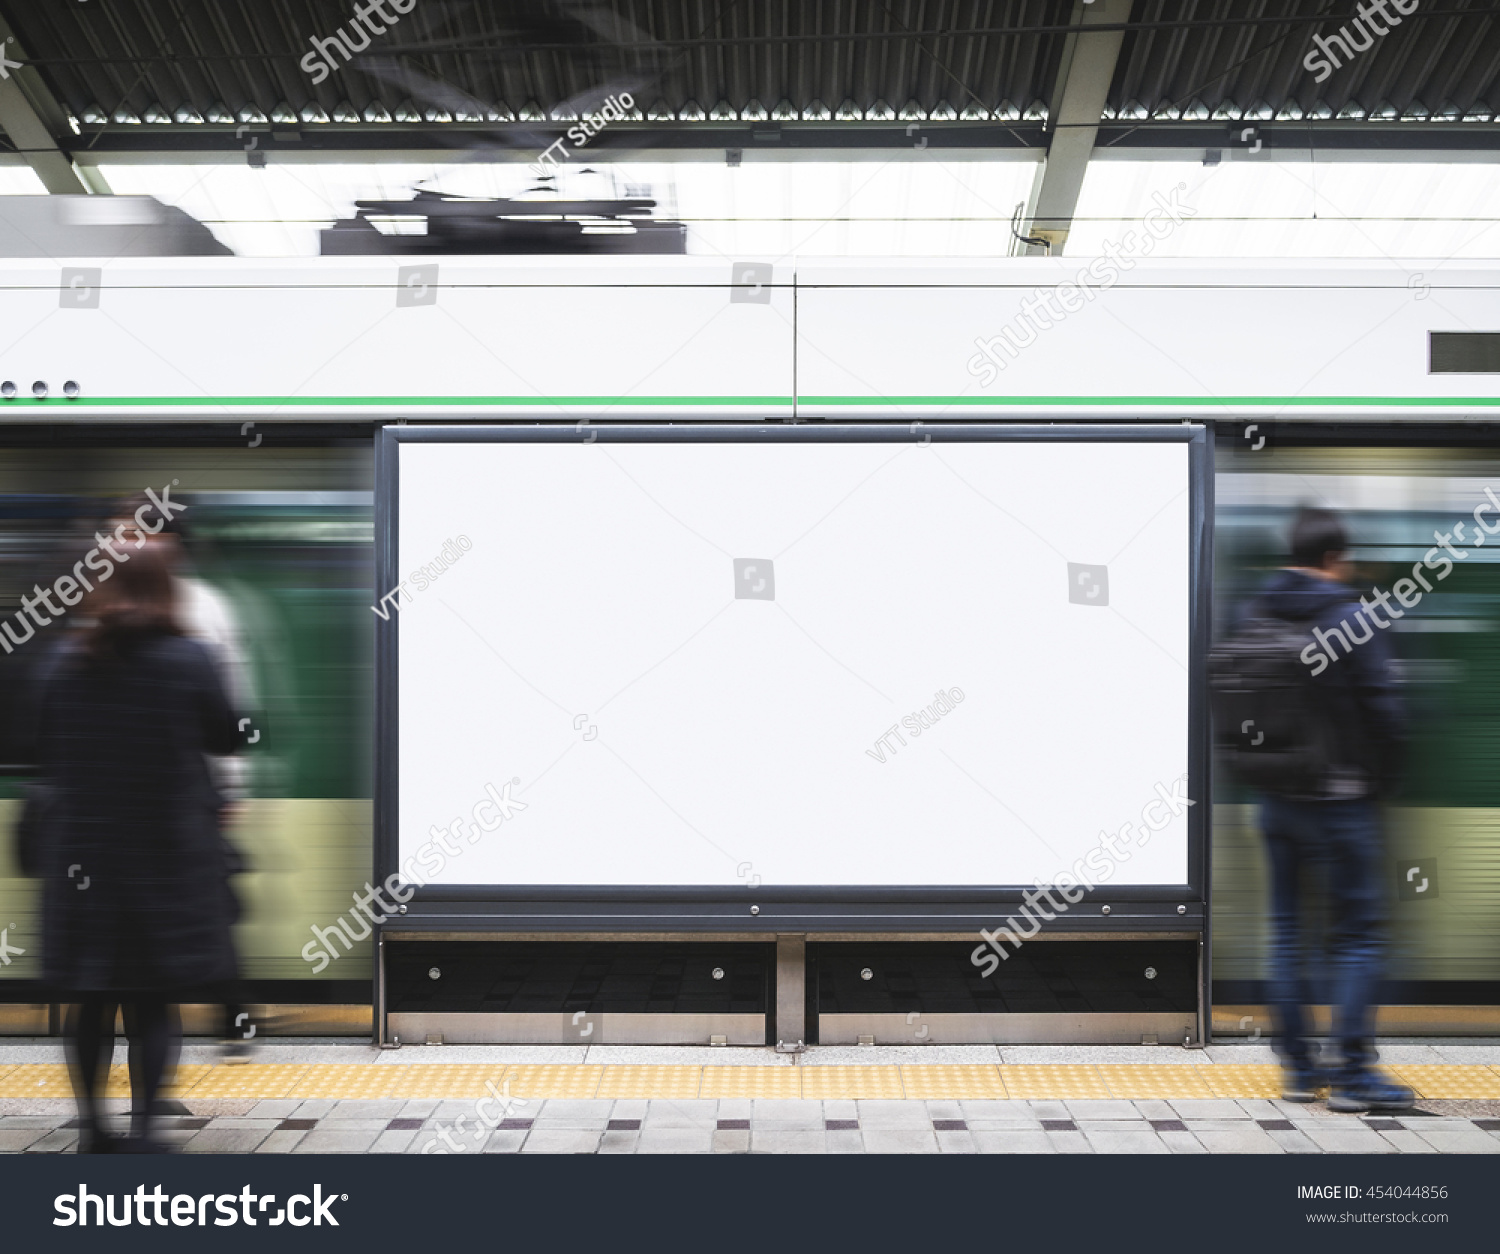 Blank Billboard Banner Light box in Subway station with blurred people Travel #454044856